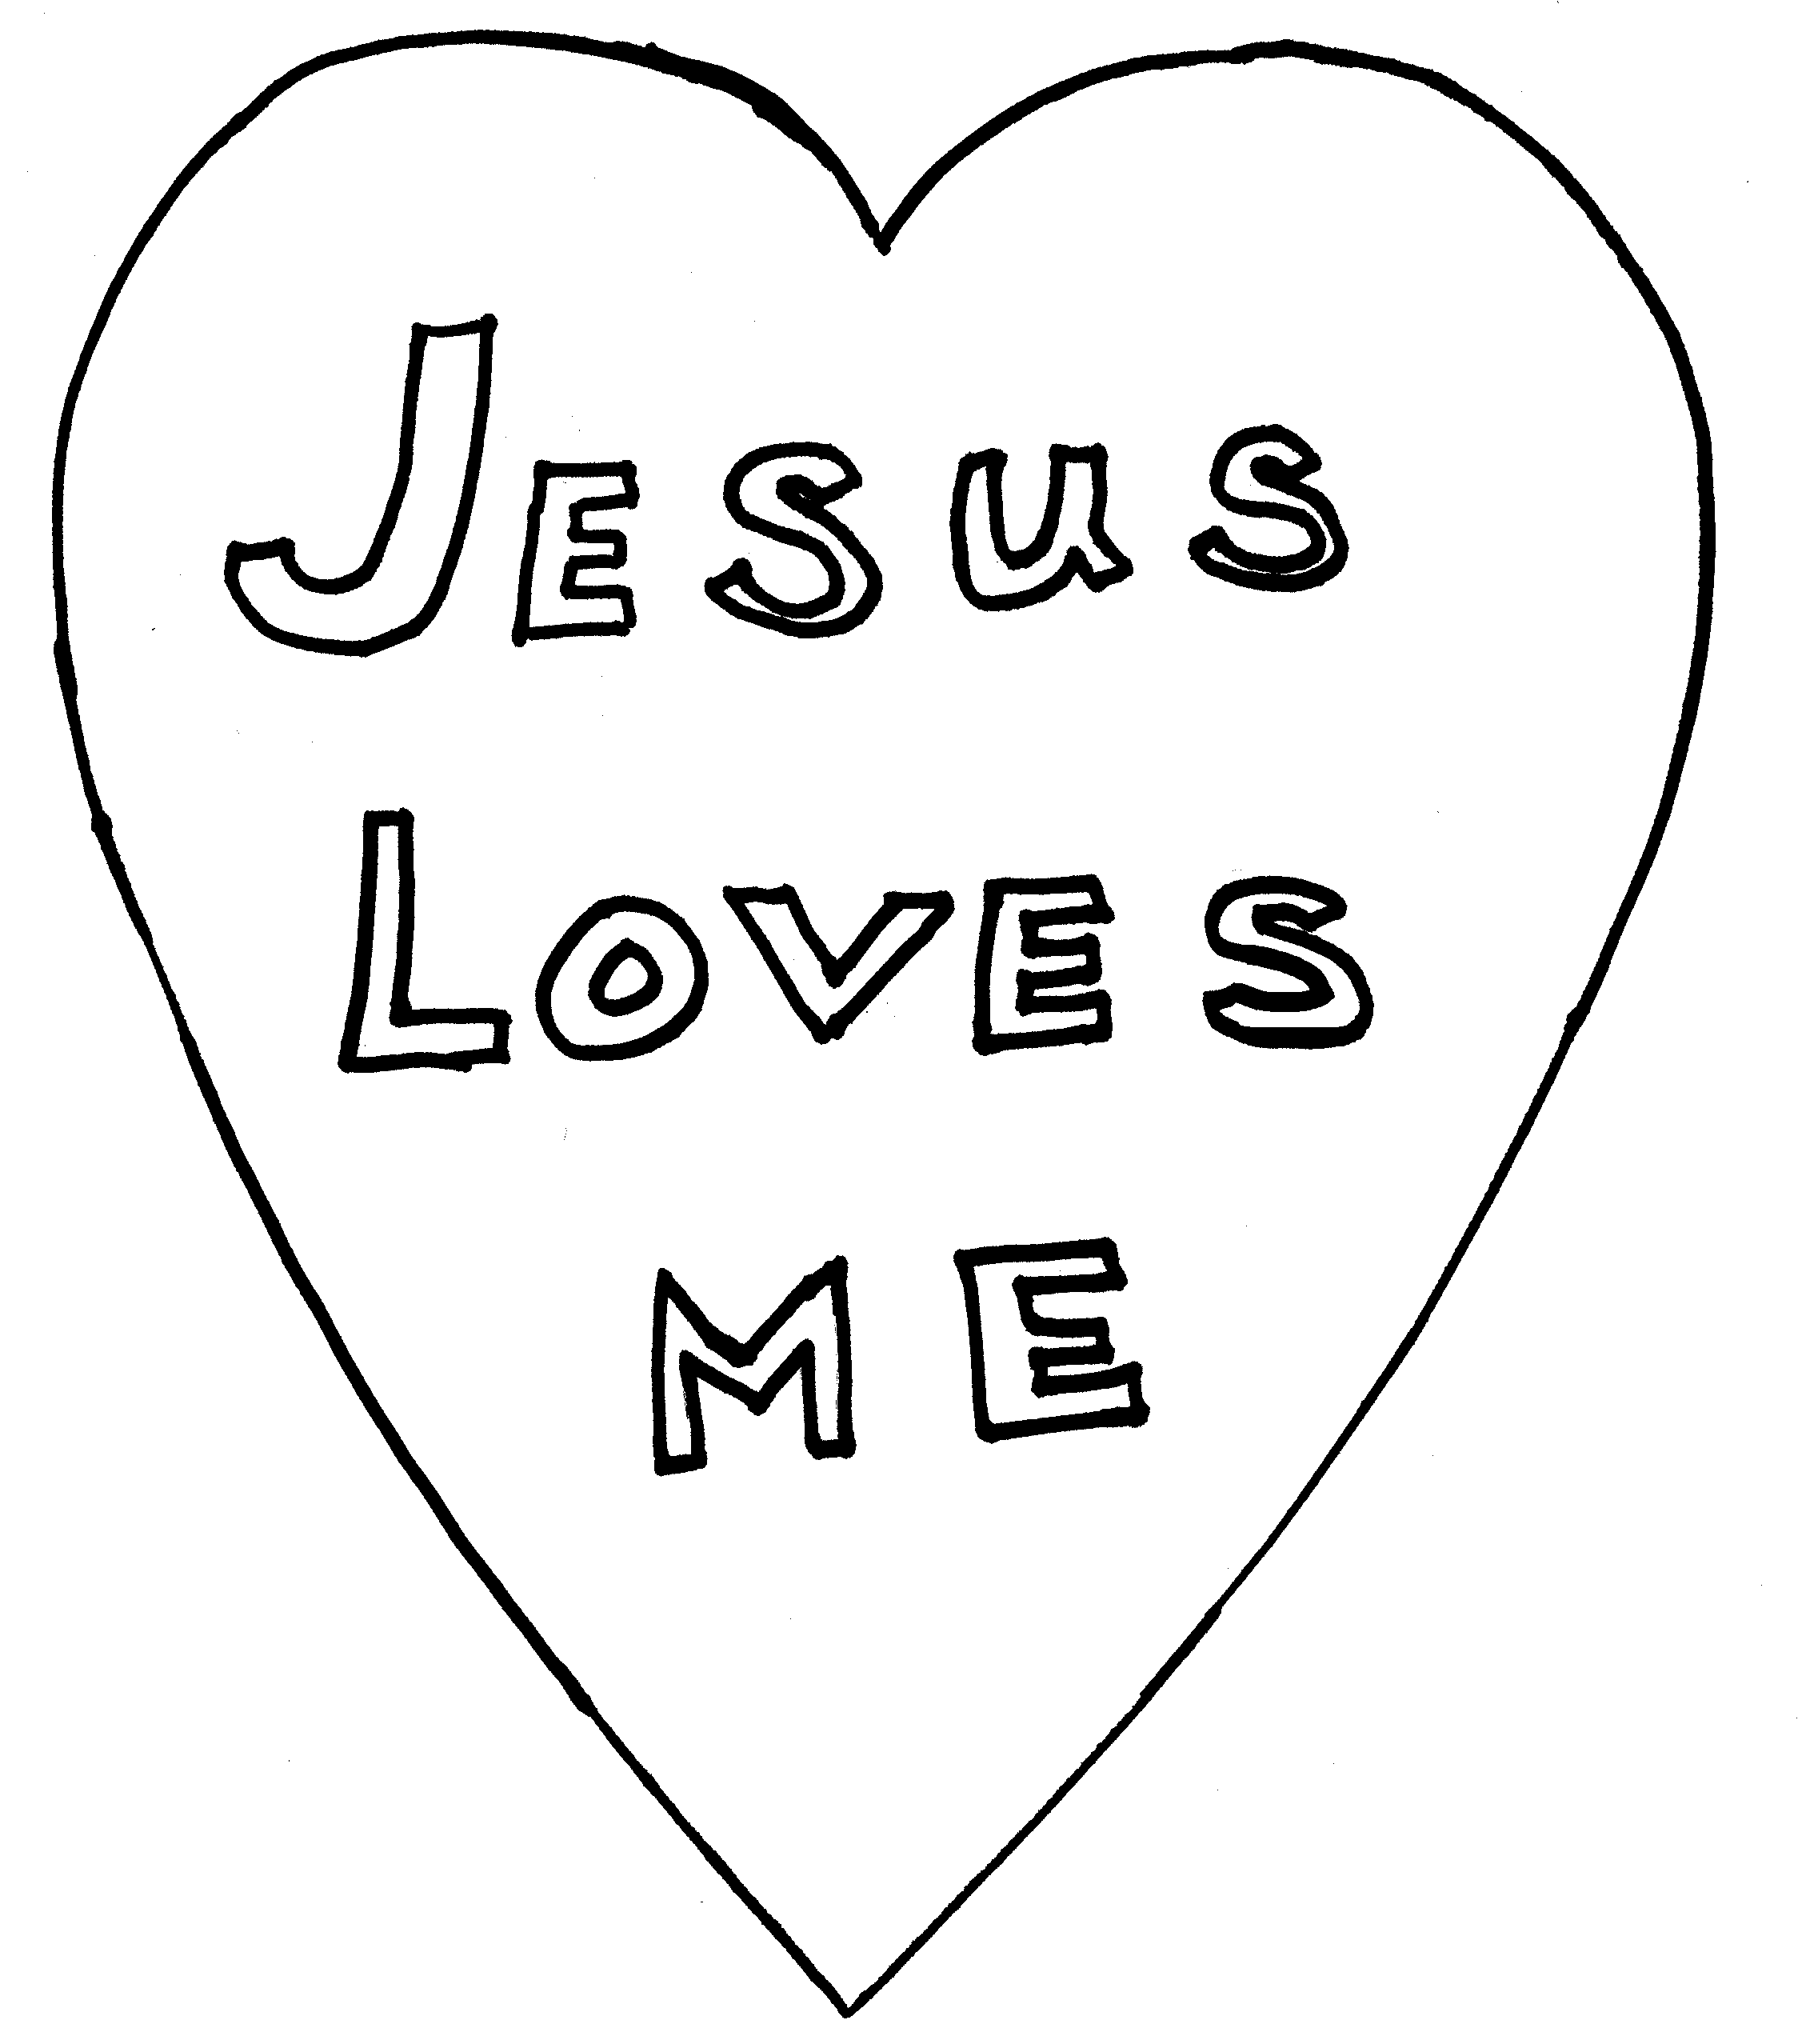 jesus-loves-me-coloring-page